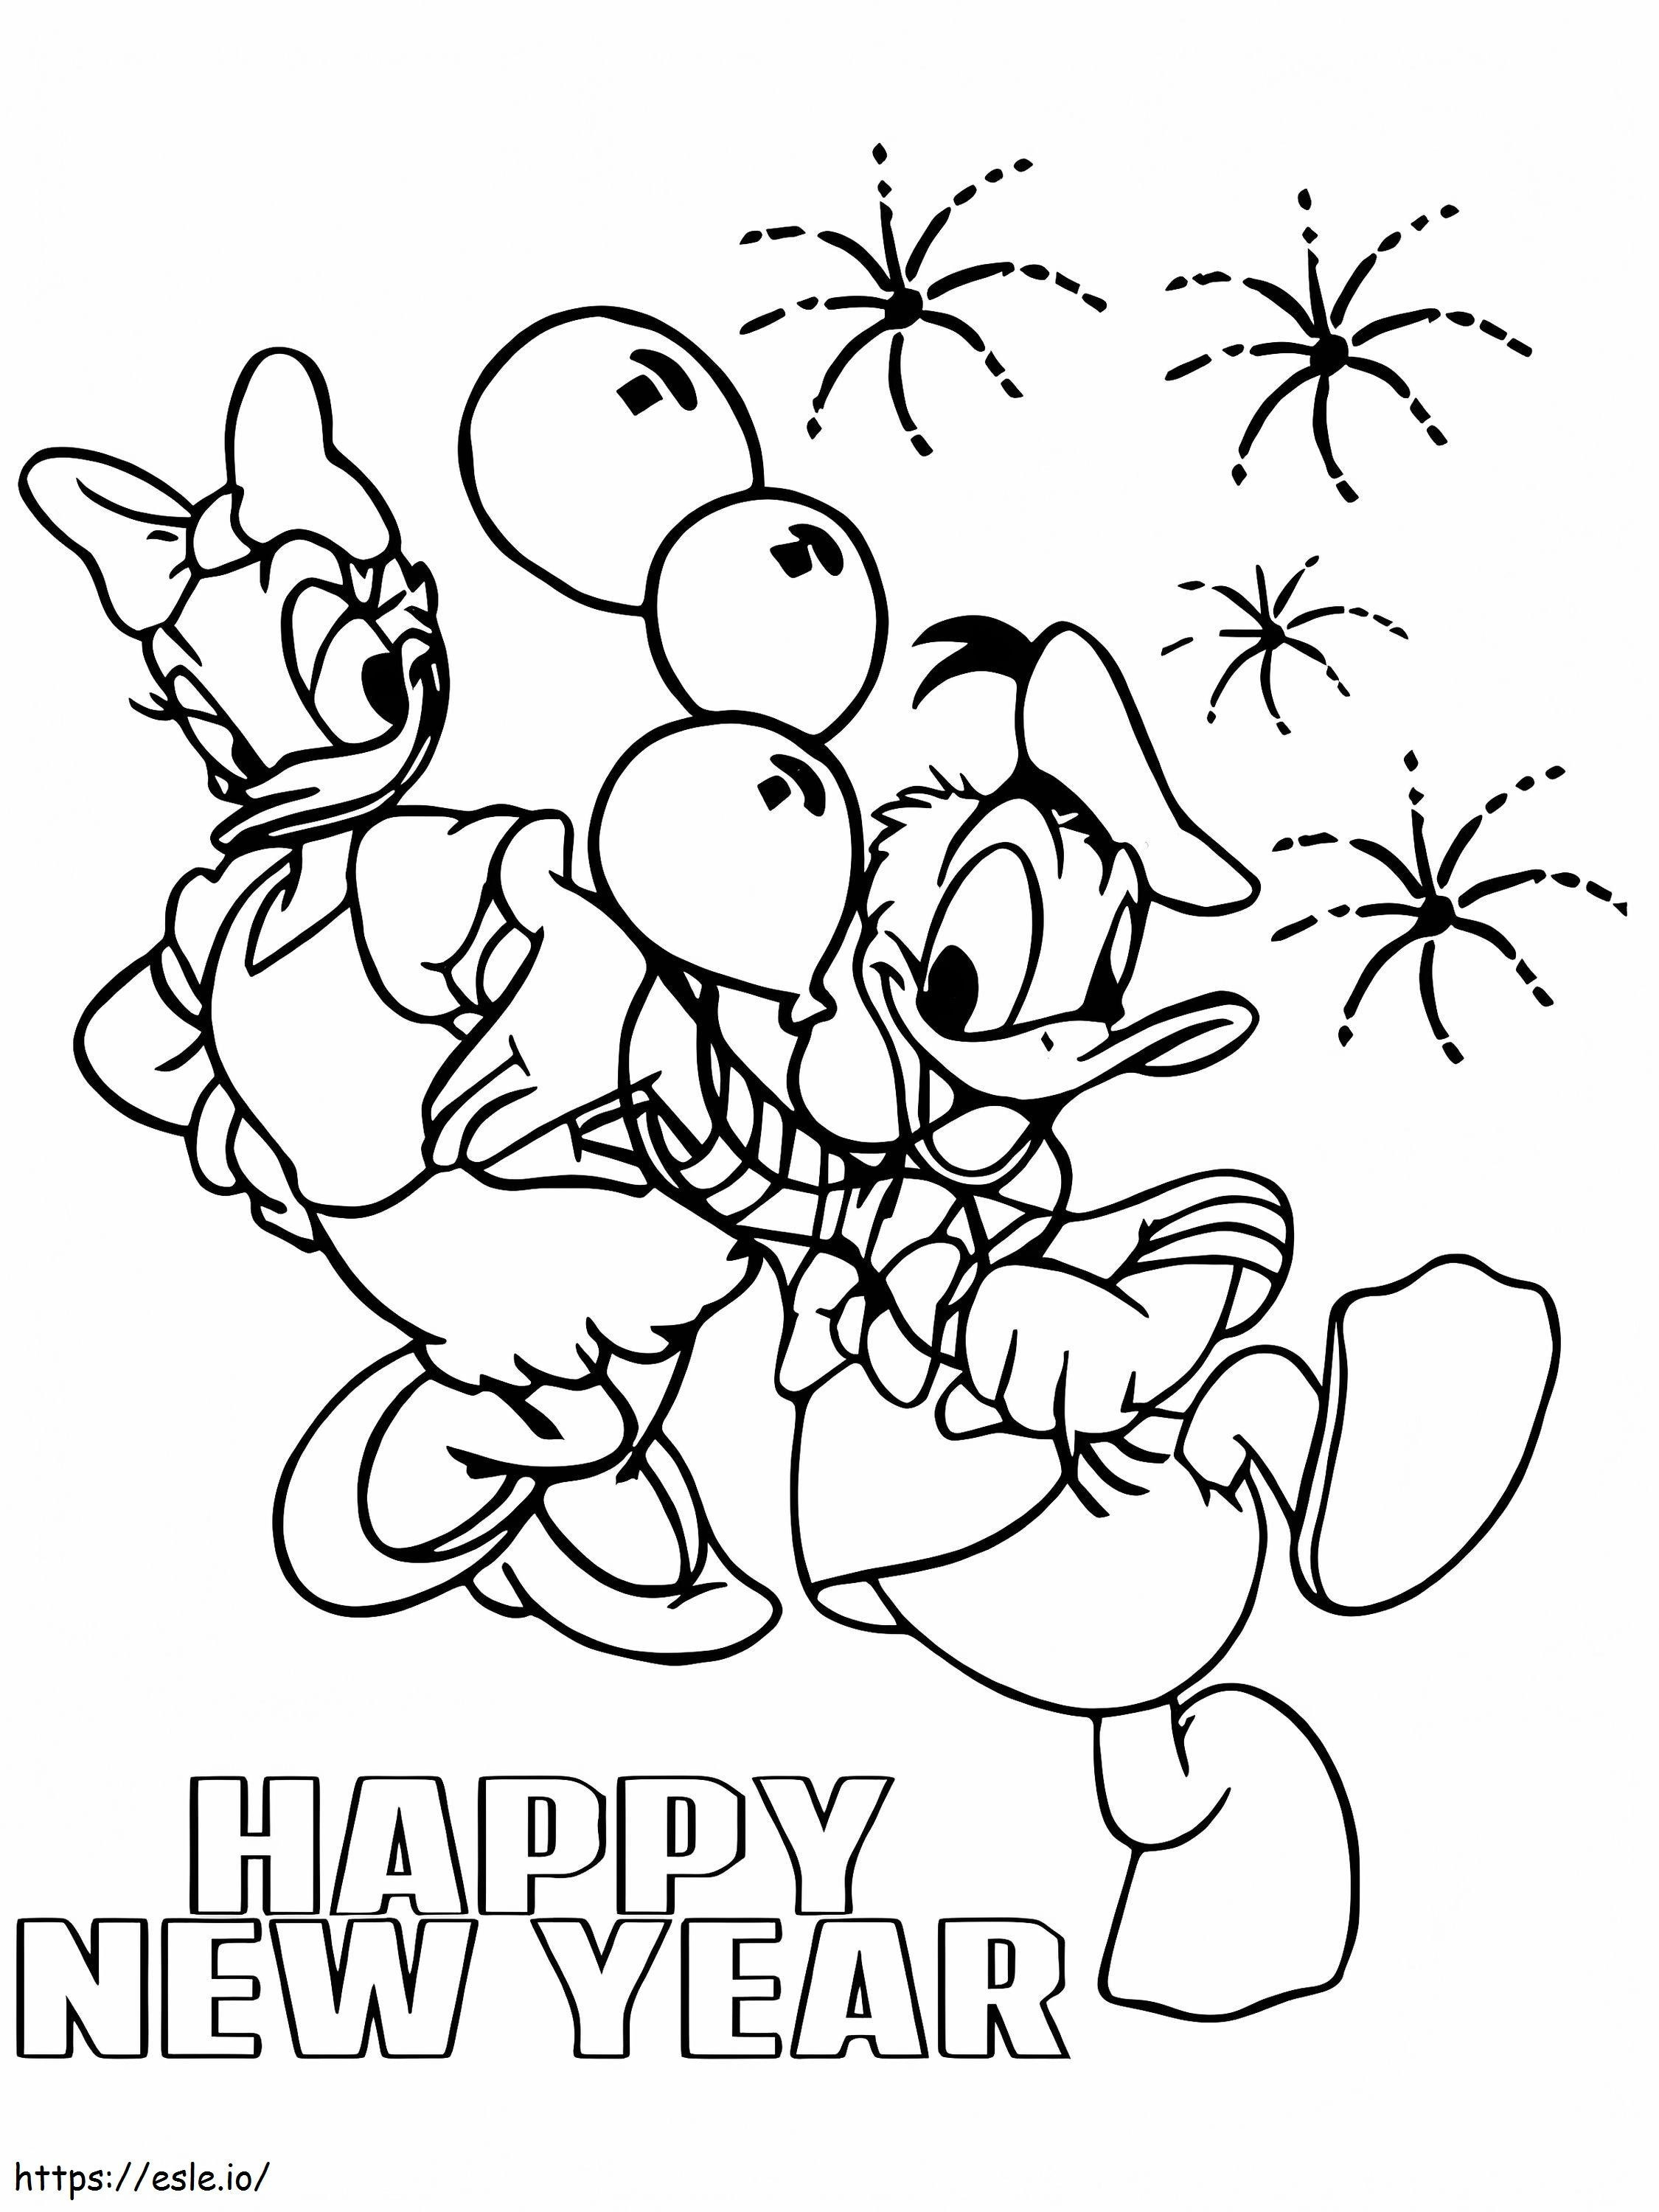 Daisy And Donald Duck Happy New Year Coloring Page coloring page